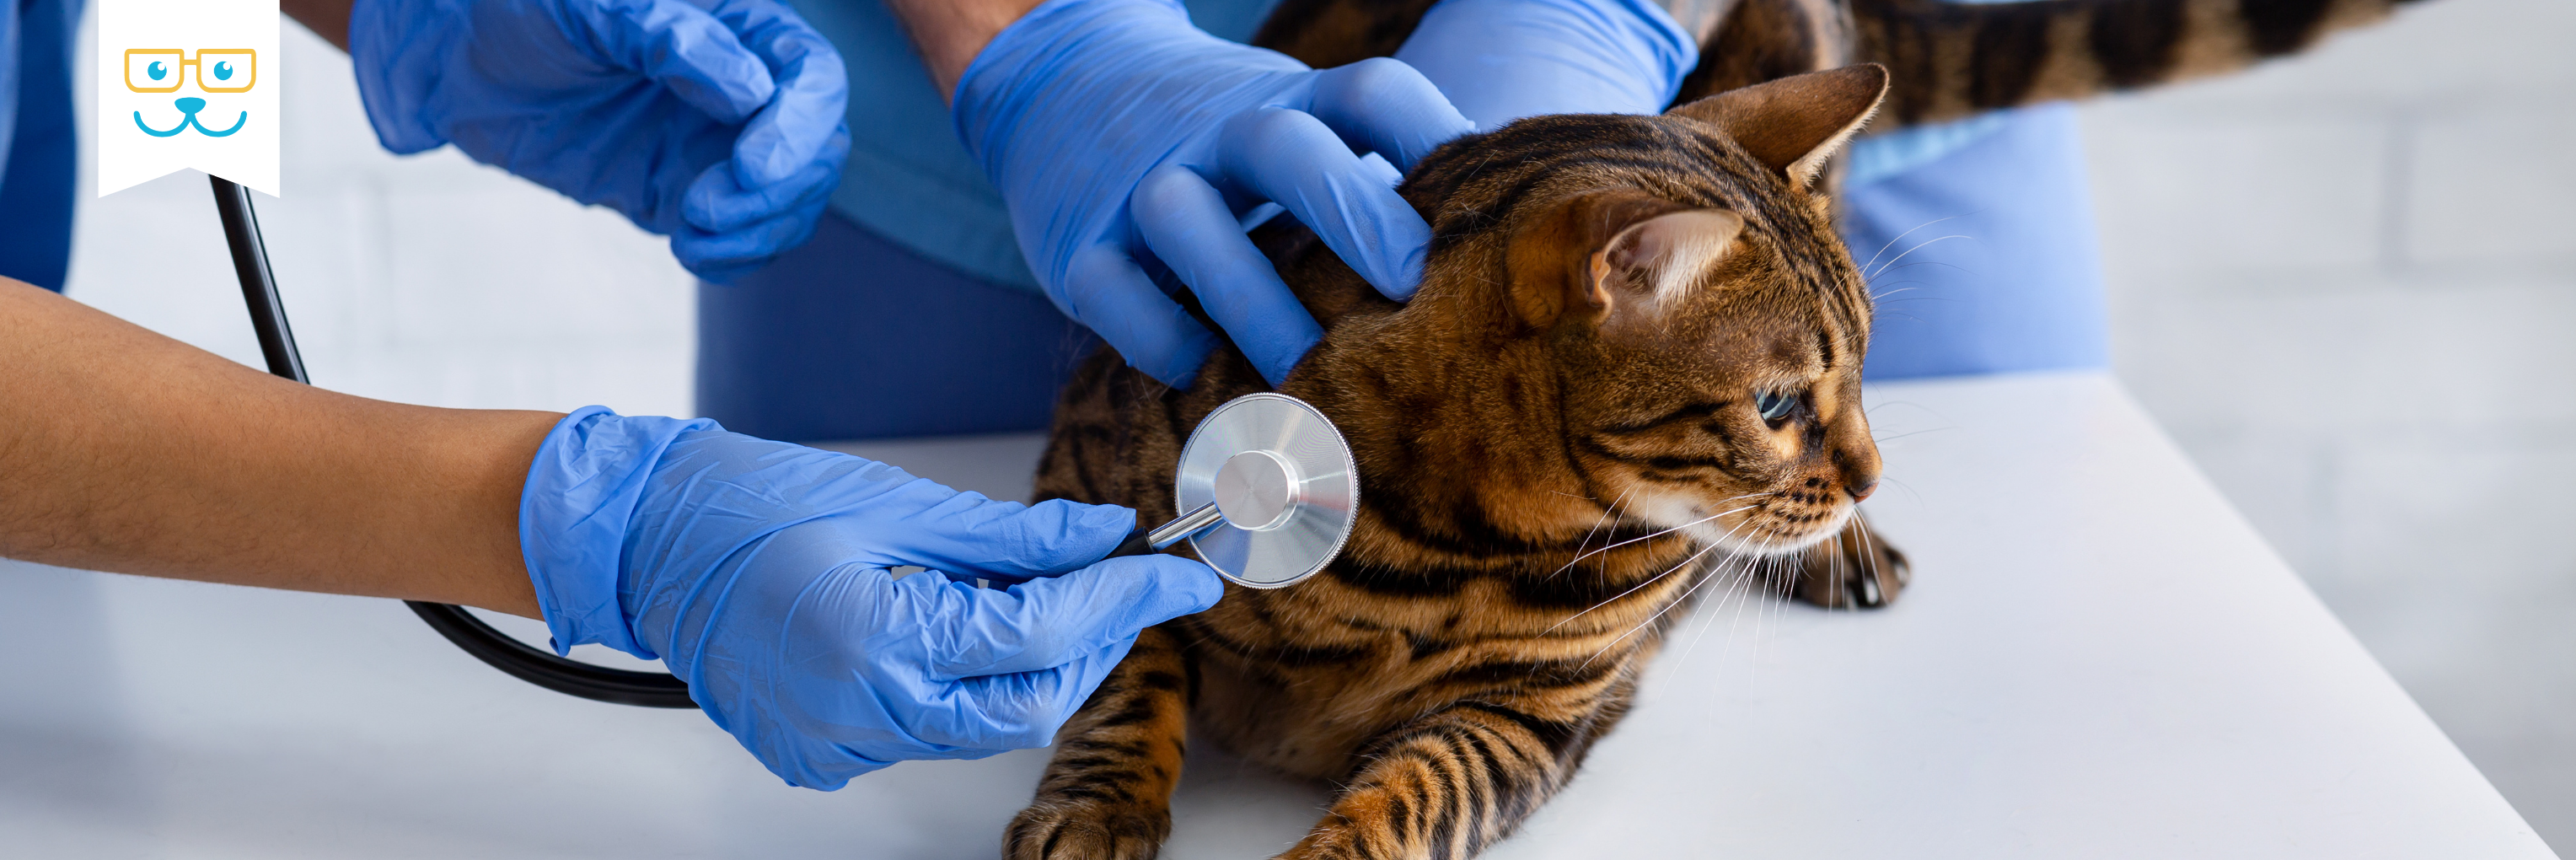 diagnosing and treating cardiology issues in cats